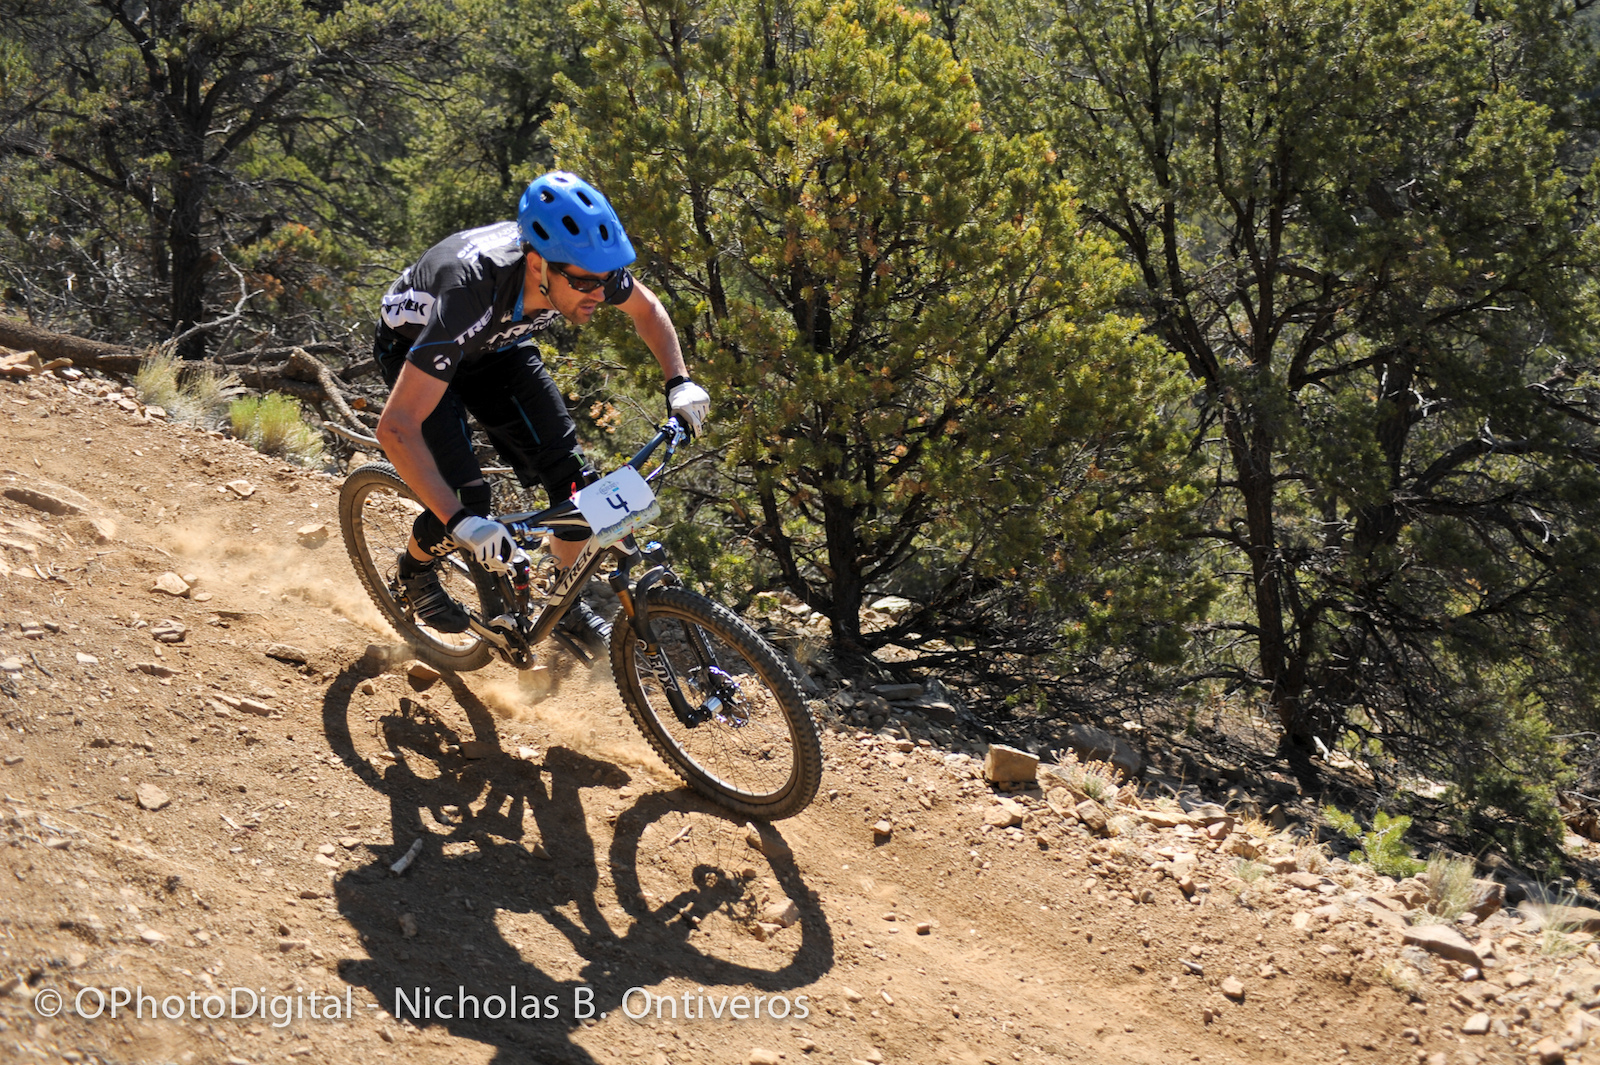 Ross Schnell sets the pace for first place on Stage 1, with nearly a 30 second lead. Four more stages to go on Day 2 of BME #1, Angel Fire/Taos.